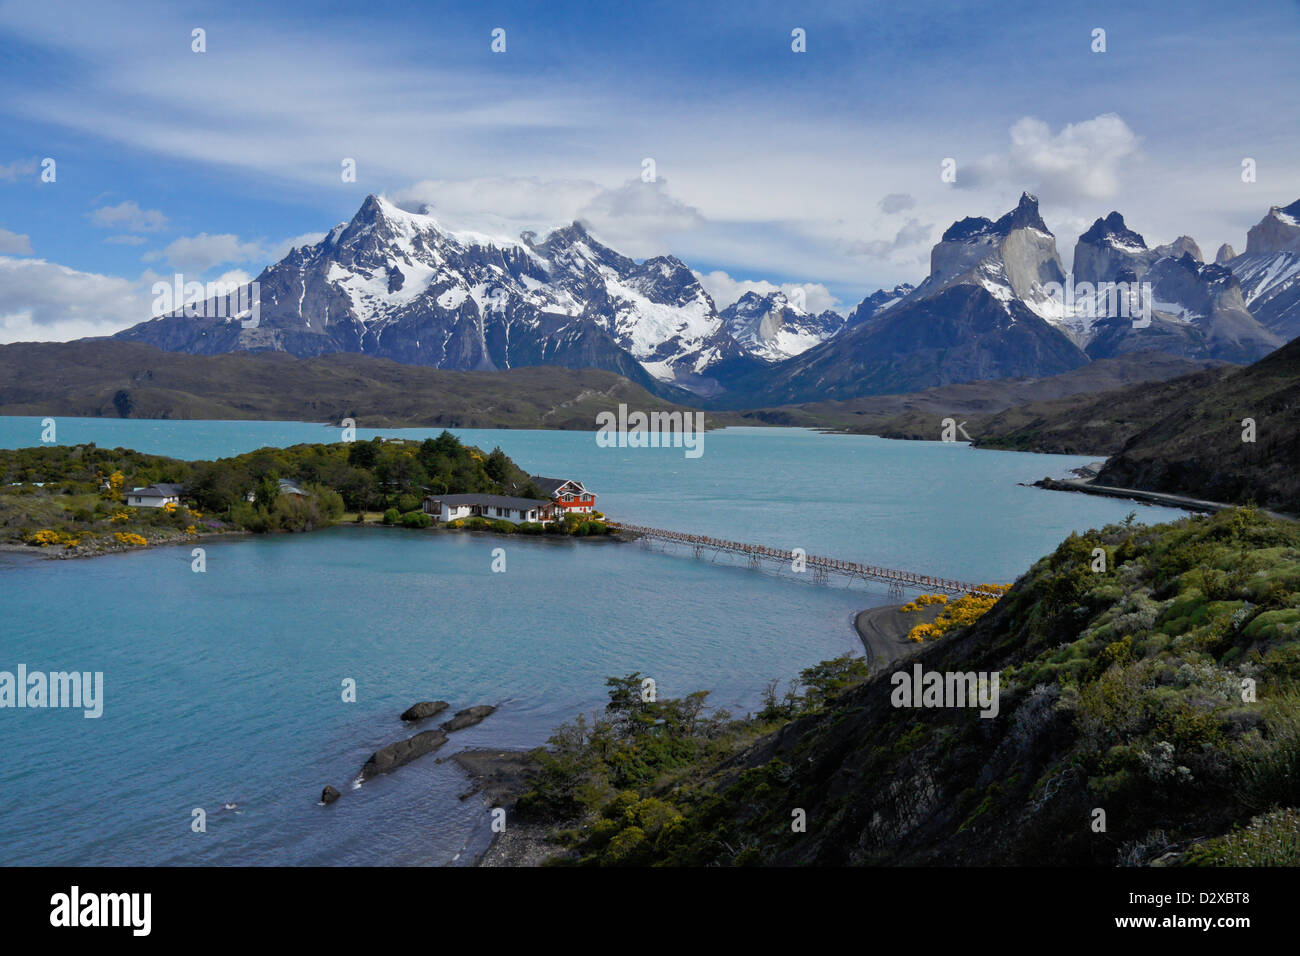 Hosteria Pehoe on Lago Pehoe, Los Cuernos and Paine Grande, Torres del Paine National Park, Patagonia, Chile Stock Photo